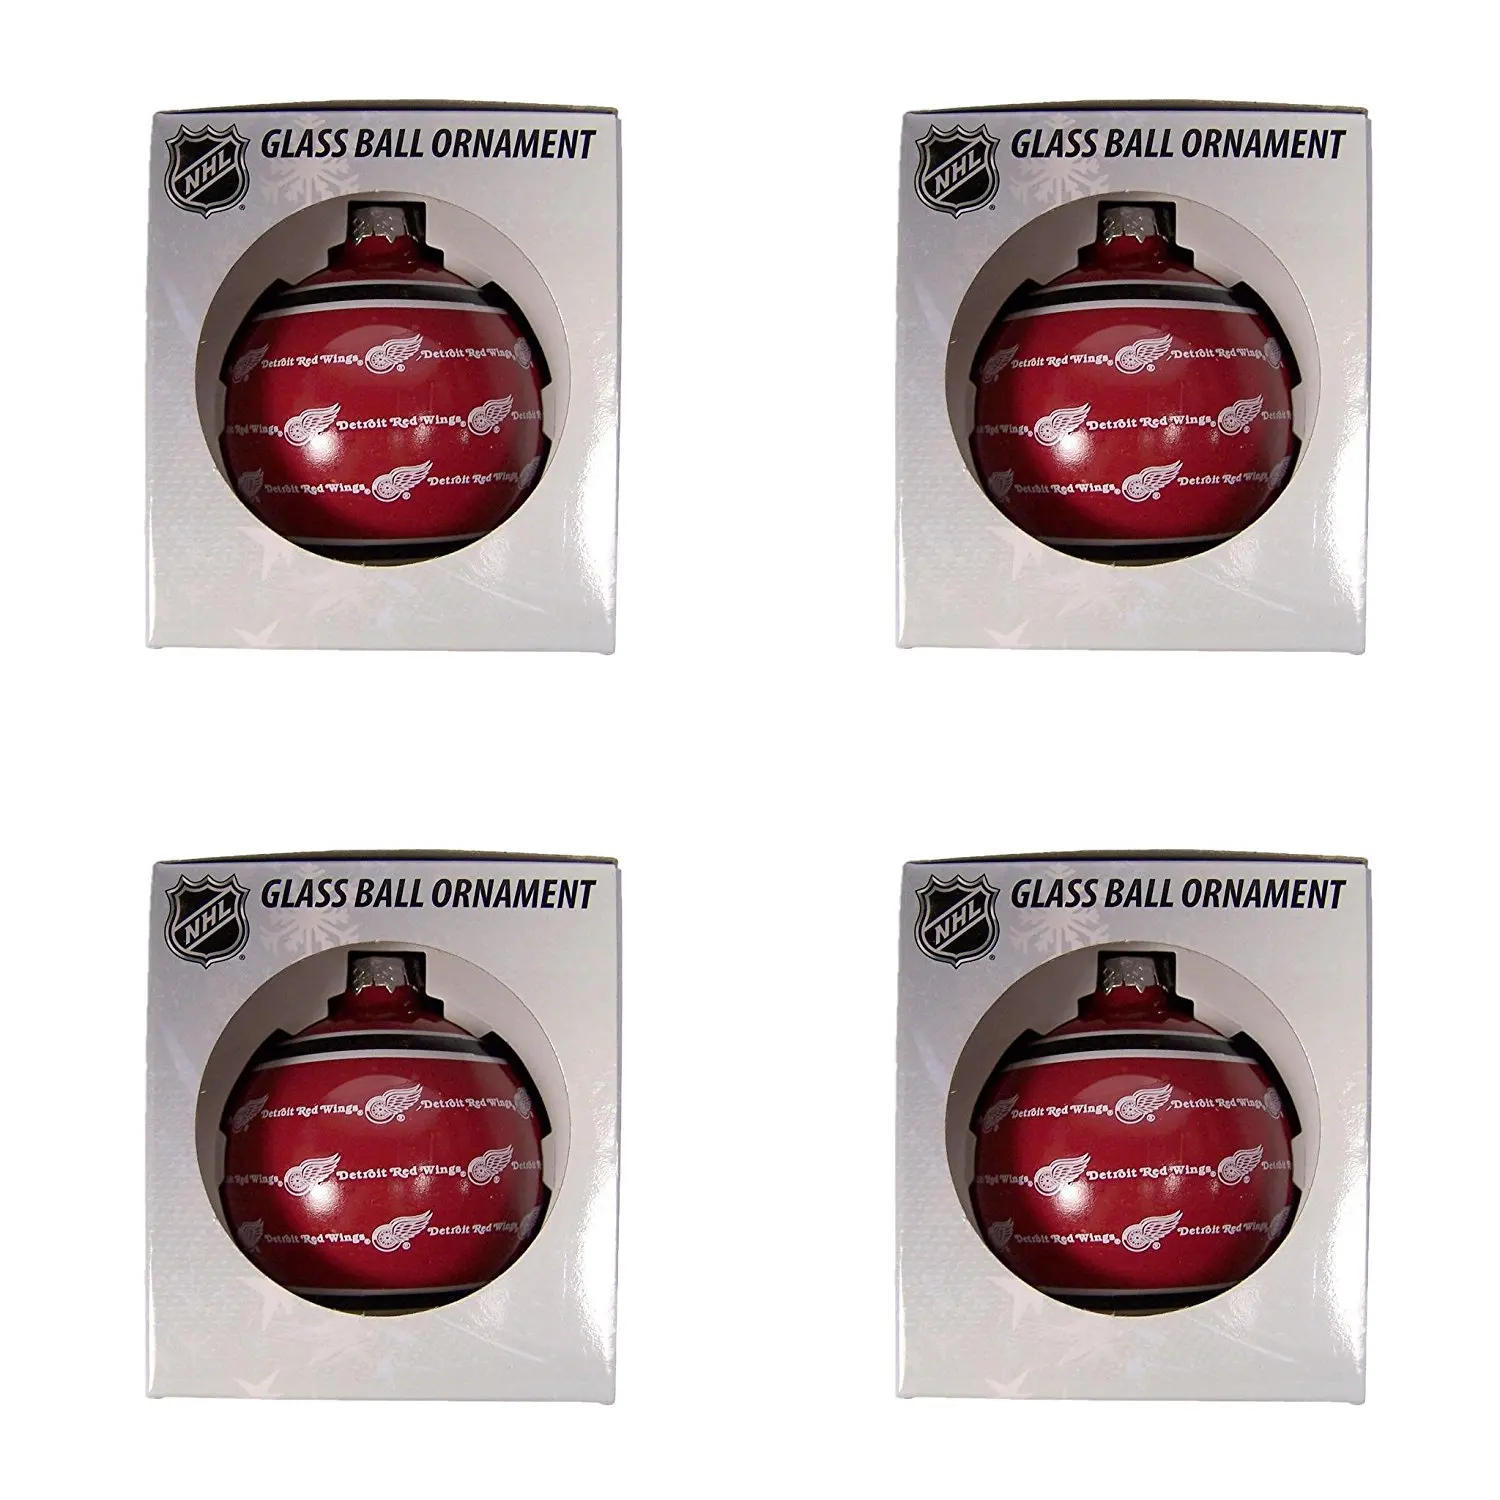 Download Buy Nhl Detroit Red Wings Repeat Glass Ball Christmas Ornament Bundle 4 Pack By Forever Collectibles In Cheap Price On Alibaba Com